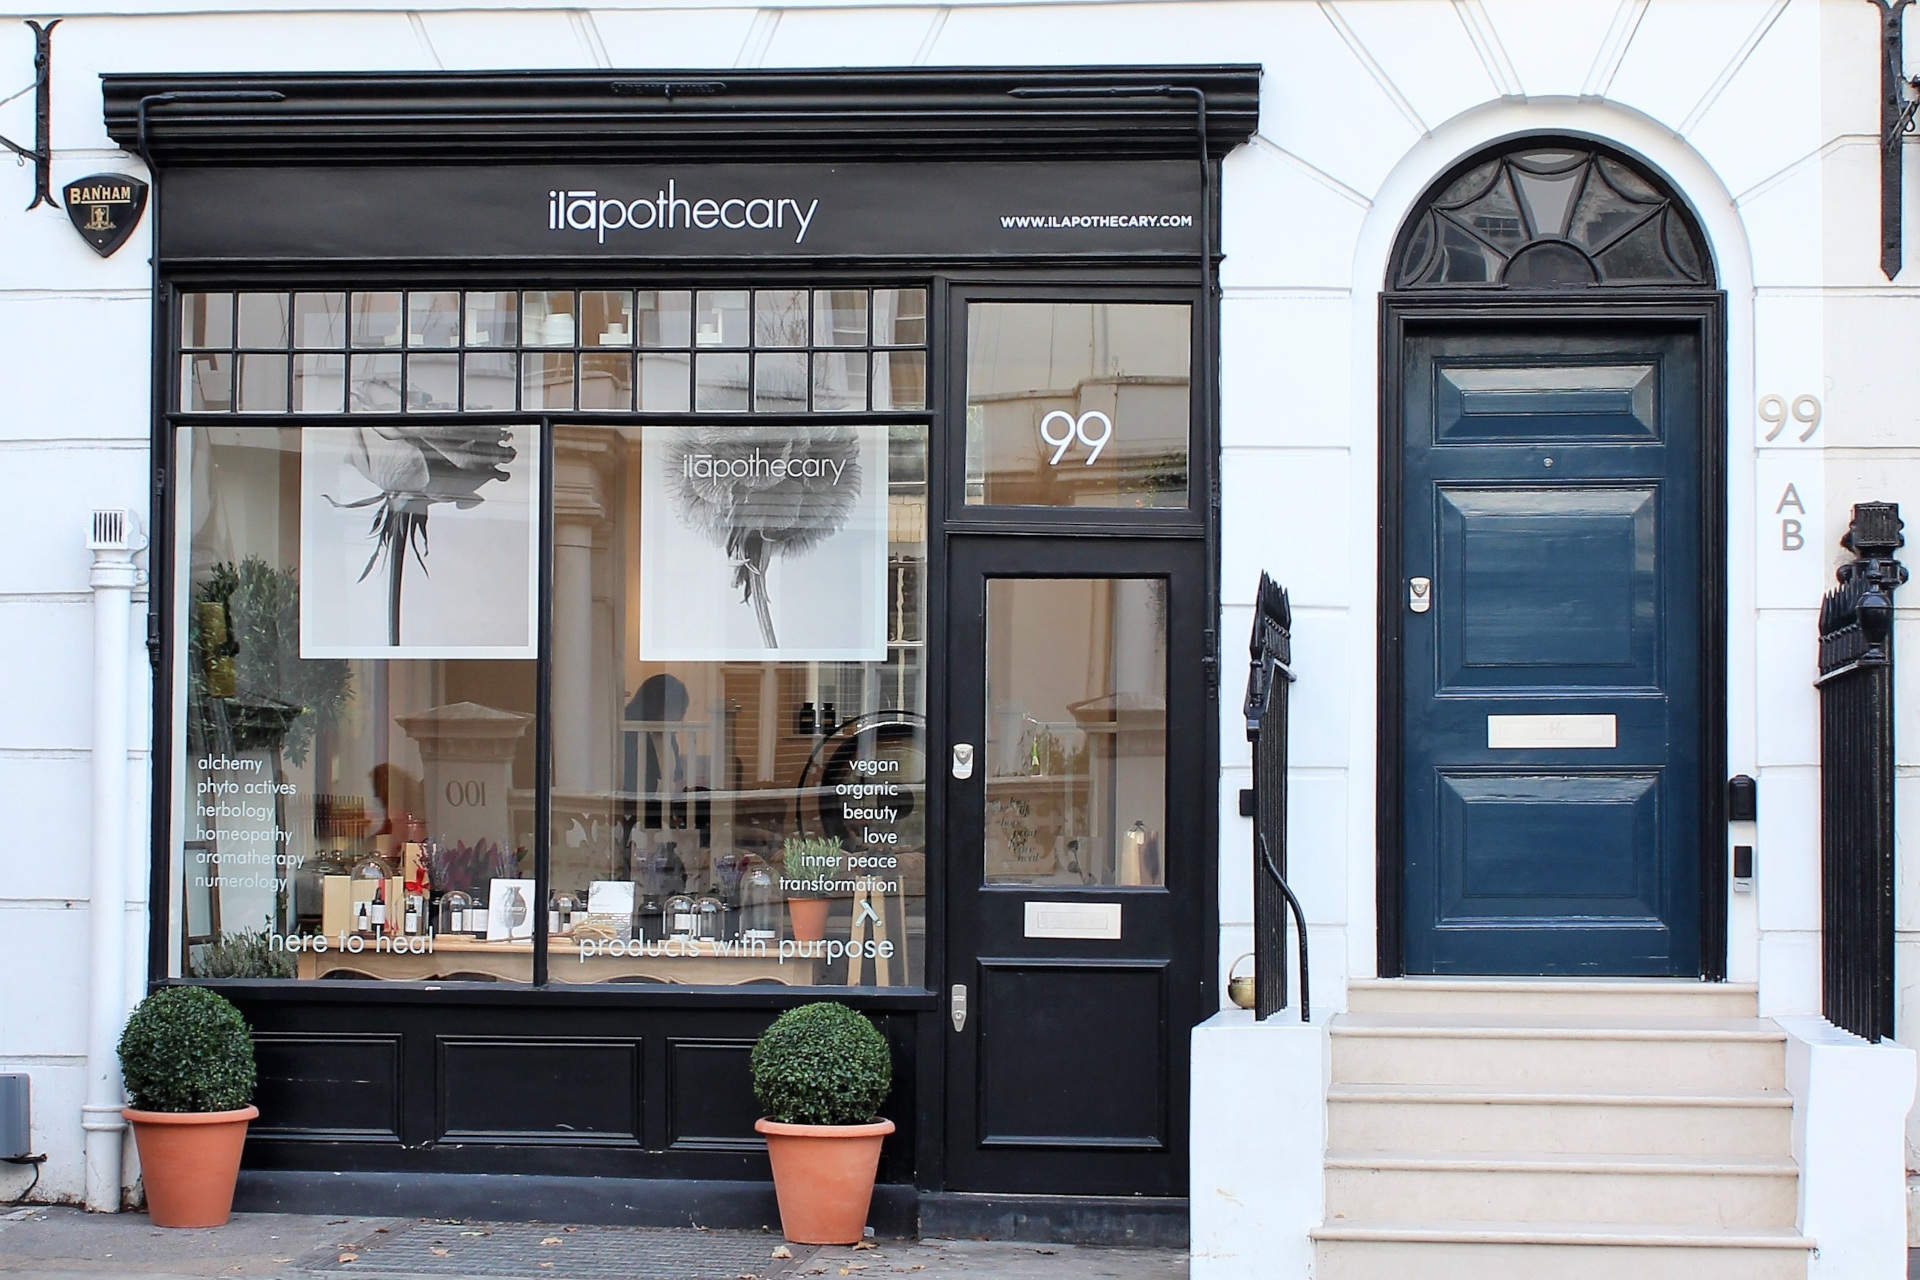 ilāpothecary shop front